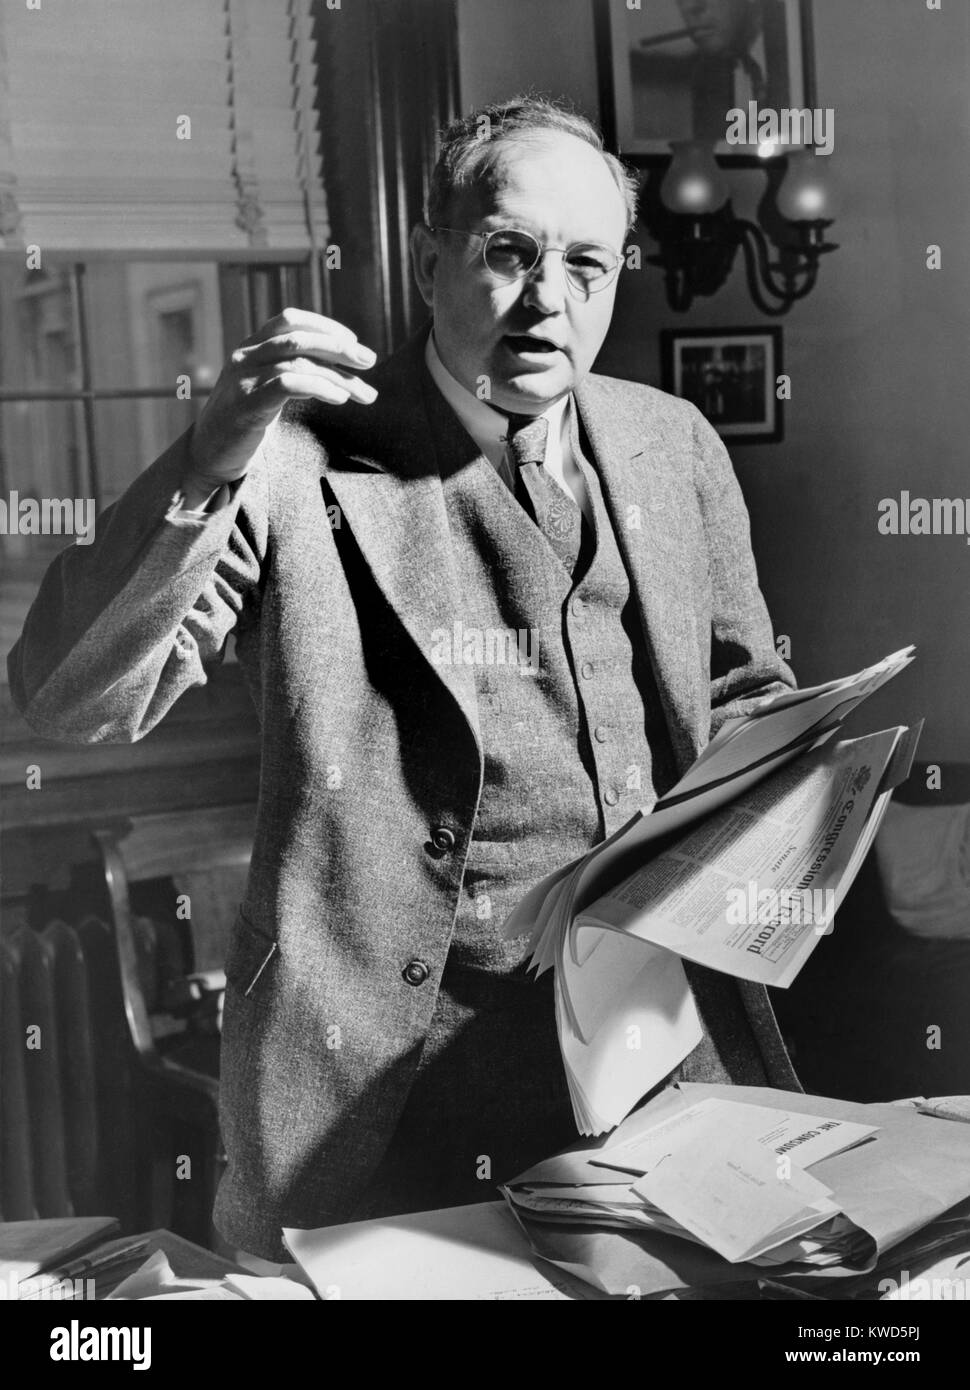 Senator James Eastland of Mississippi holding paper and gesturing for a news photographer in 1946. He held his Senate seat for 35 years, and fought against civil rights legislation from the 1940s through 1960s. (BSLOC 2014 13 51) Stock Photo